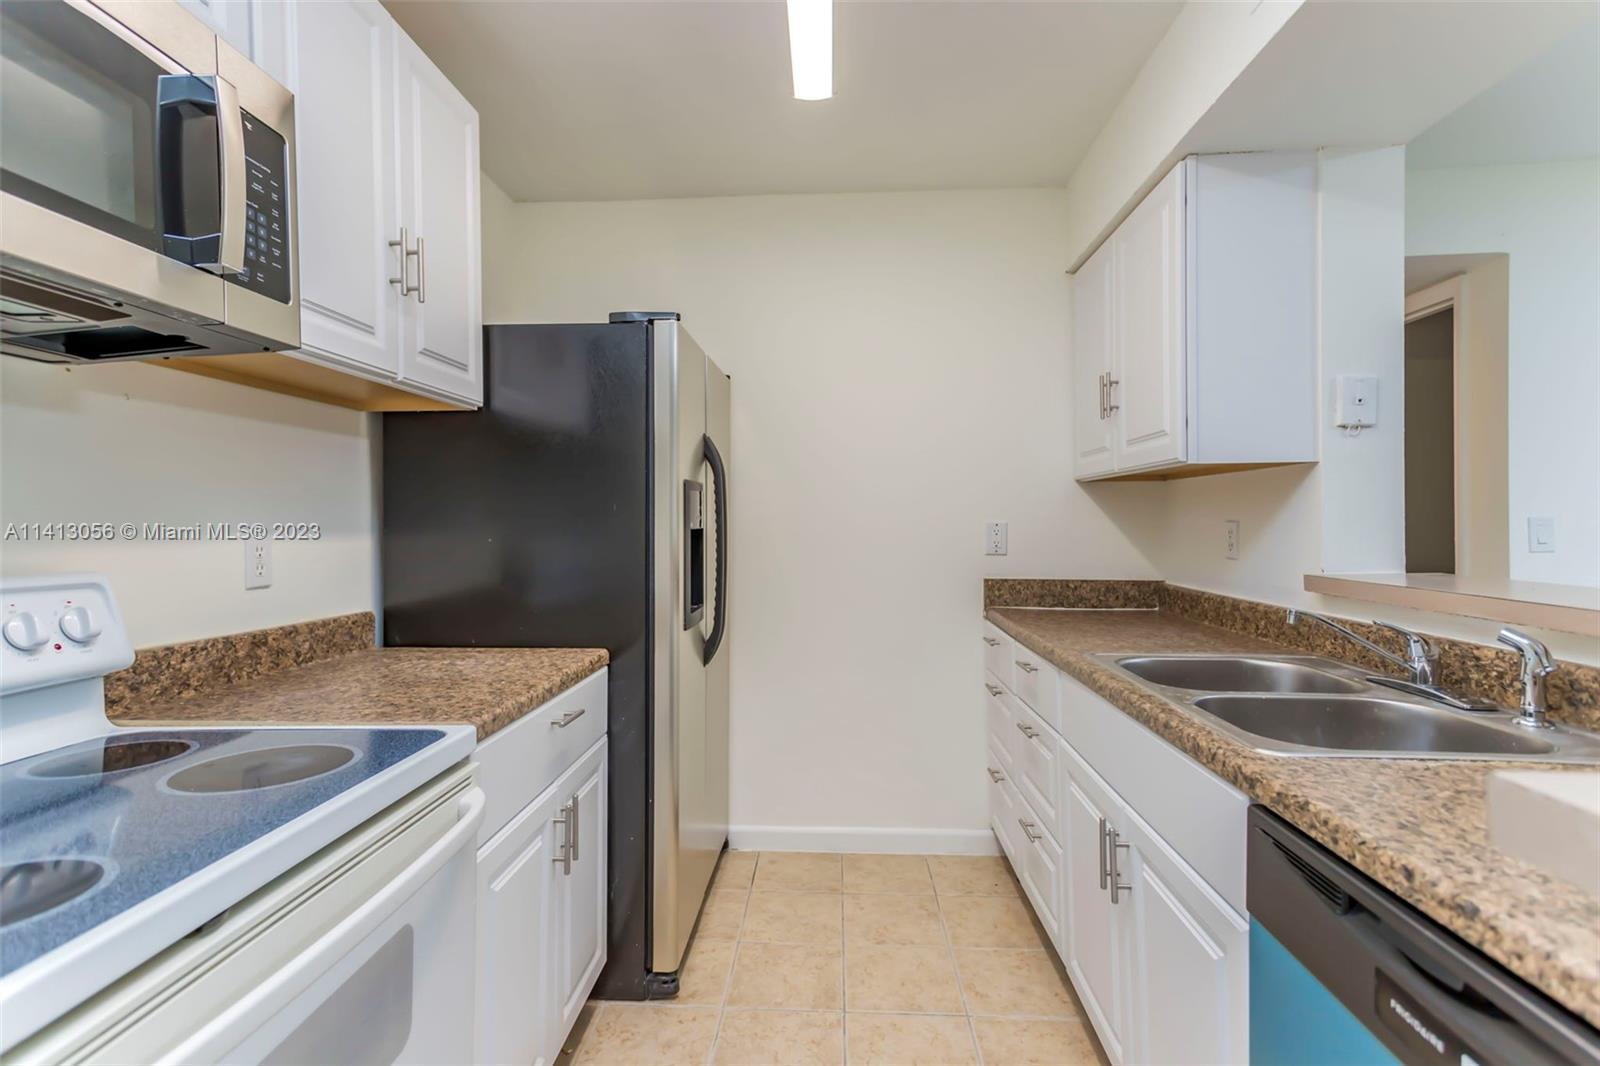 Amazing and renovated unit 2 bedrooms and 2 baths in a well maintained community and ready to move i